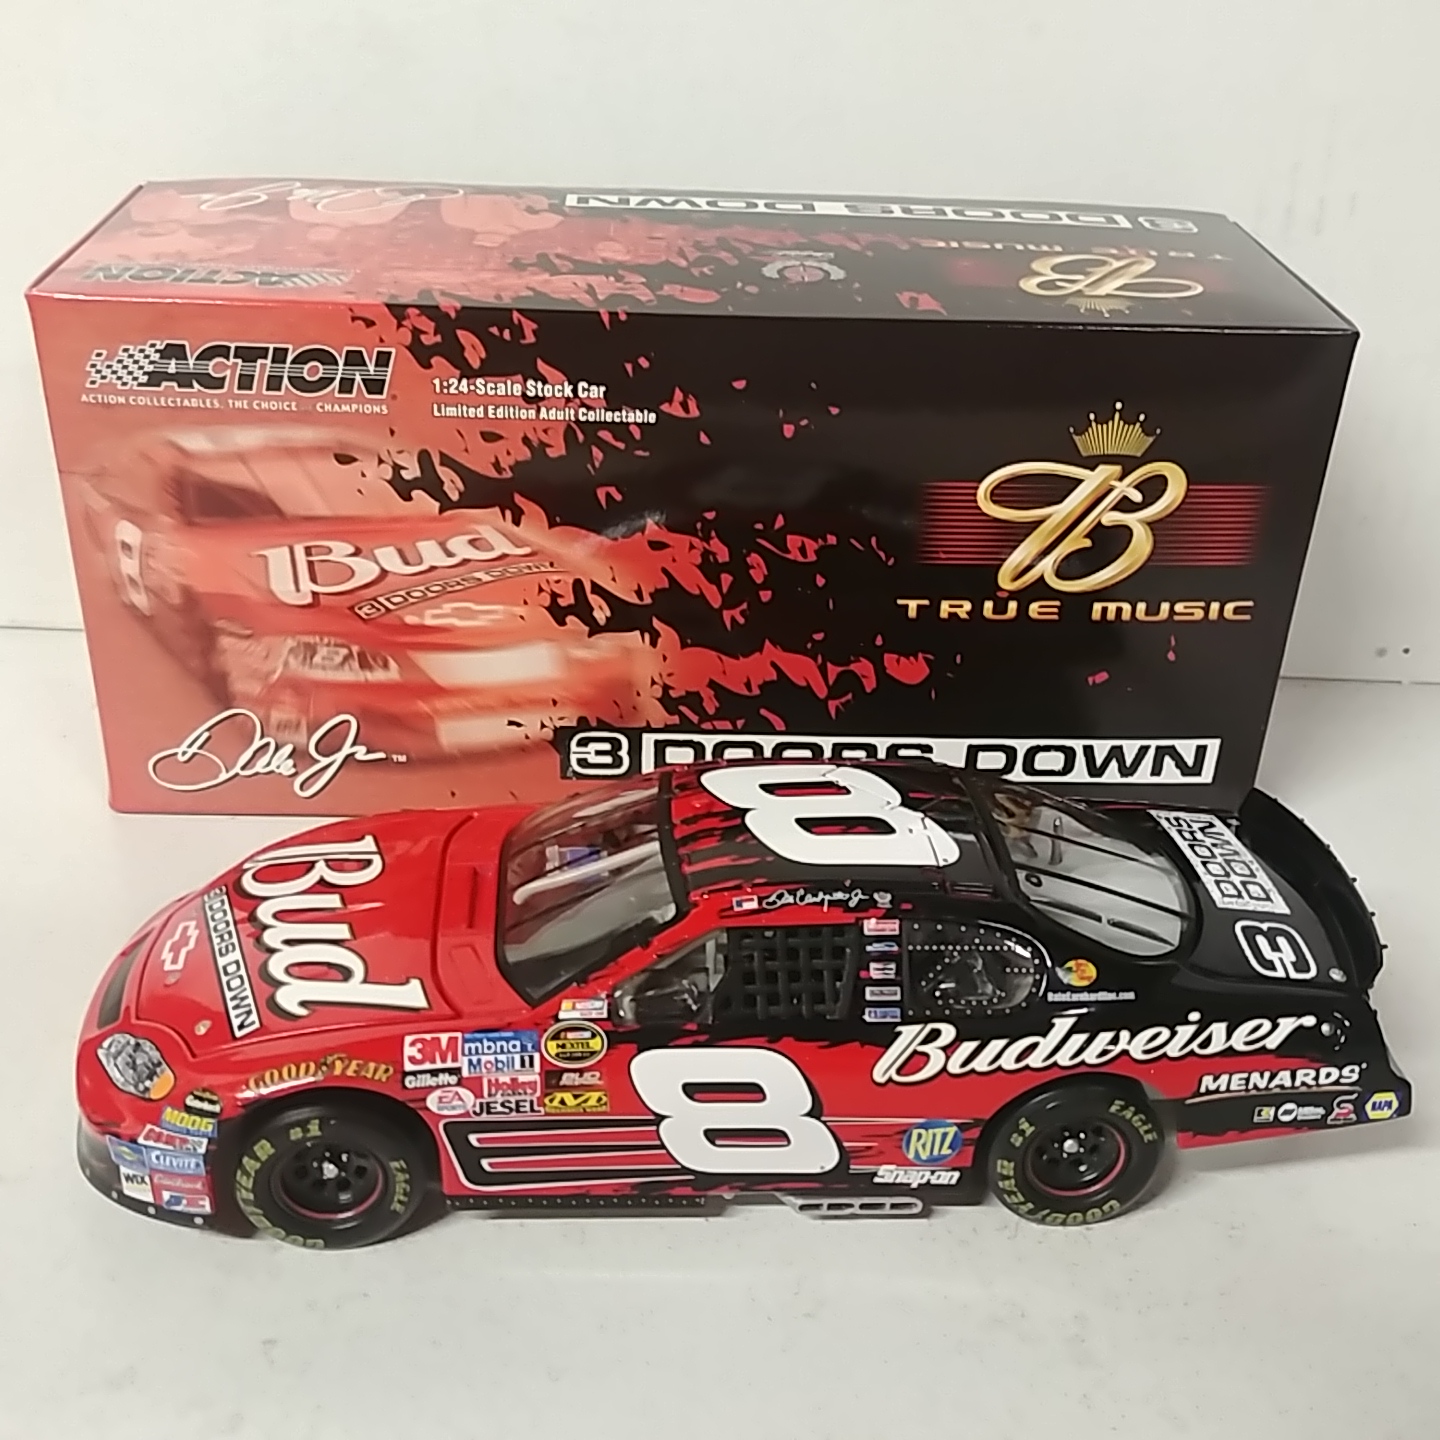 2005 Dale Earnhardt Jr 1/24th Budweiser "Chevy Rock and Roll" "3 Doors Down" c/w car